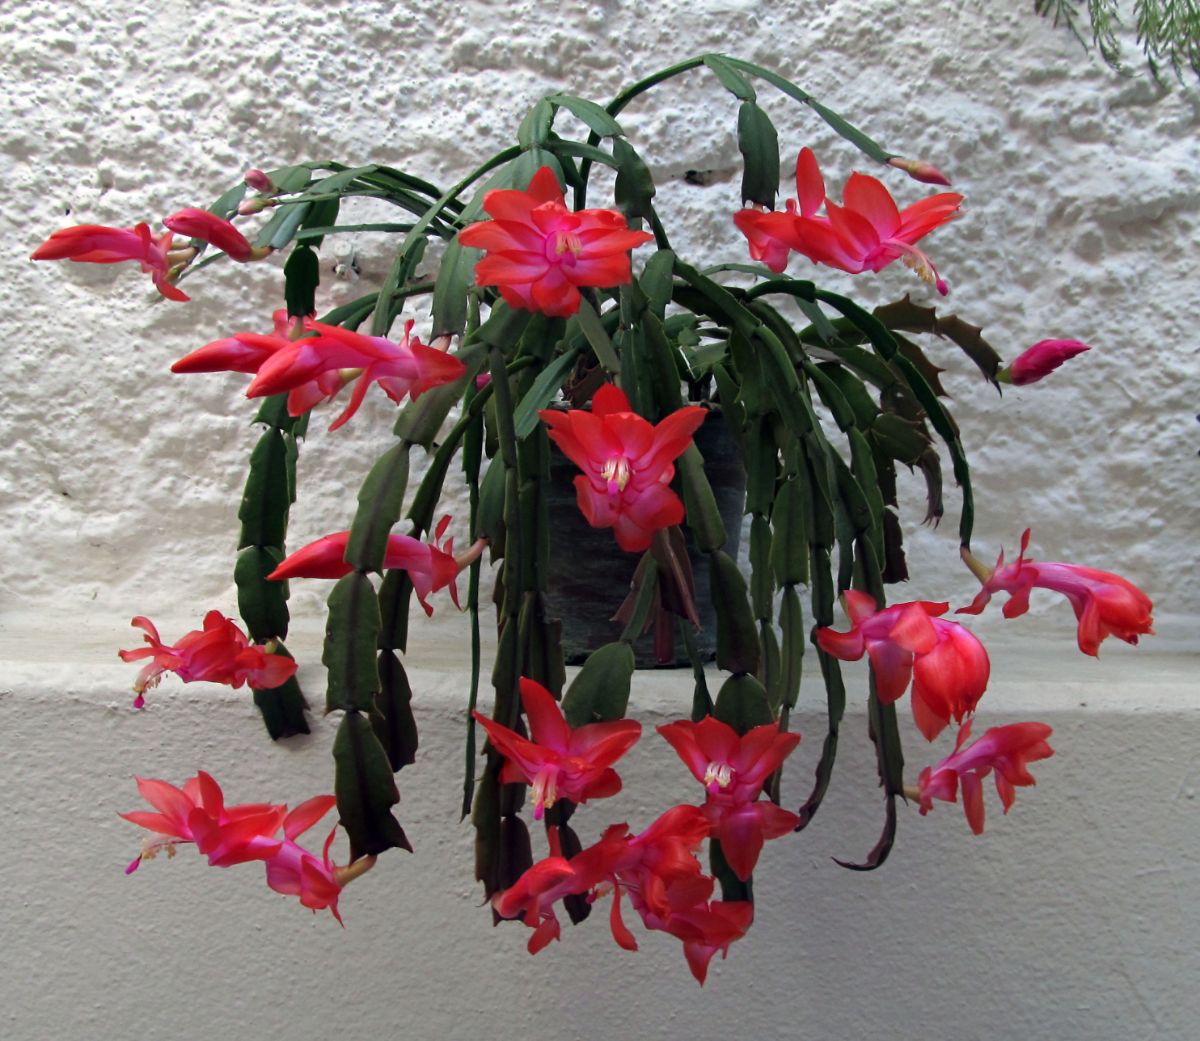 A pink-blossomed Christmas cactus in full bloom